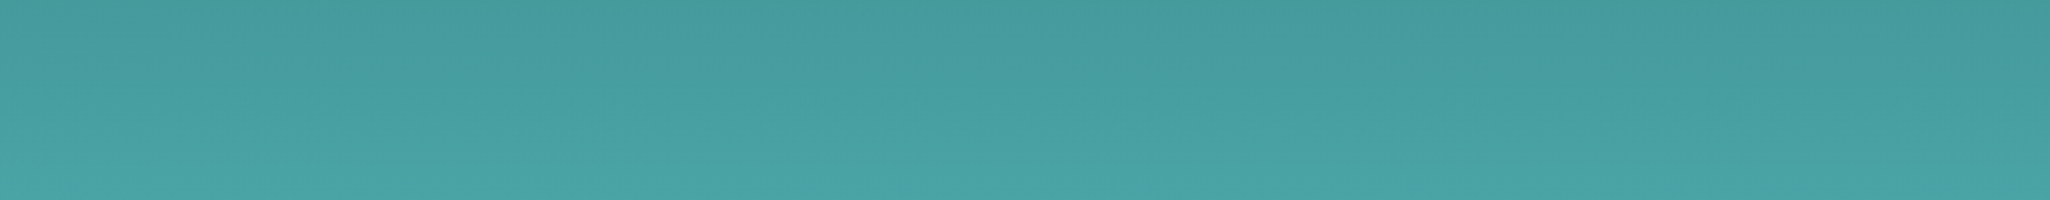 a rectangle which is coloured teal